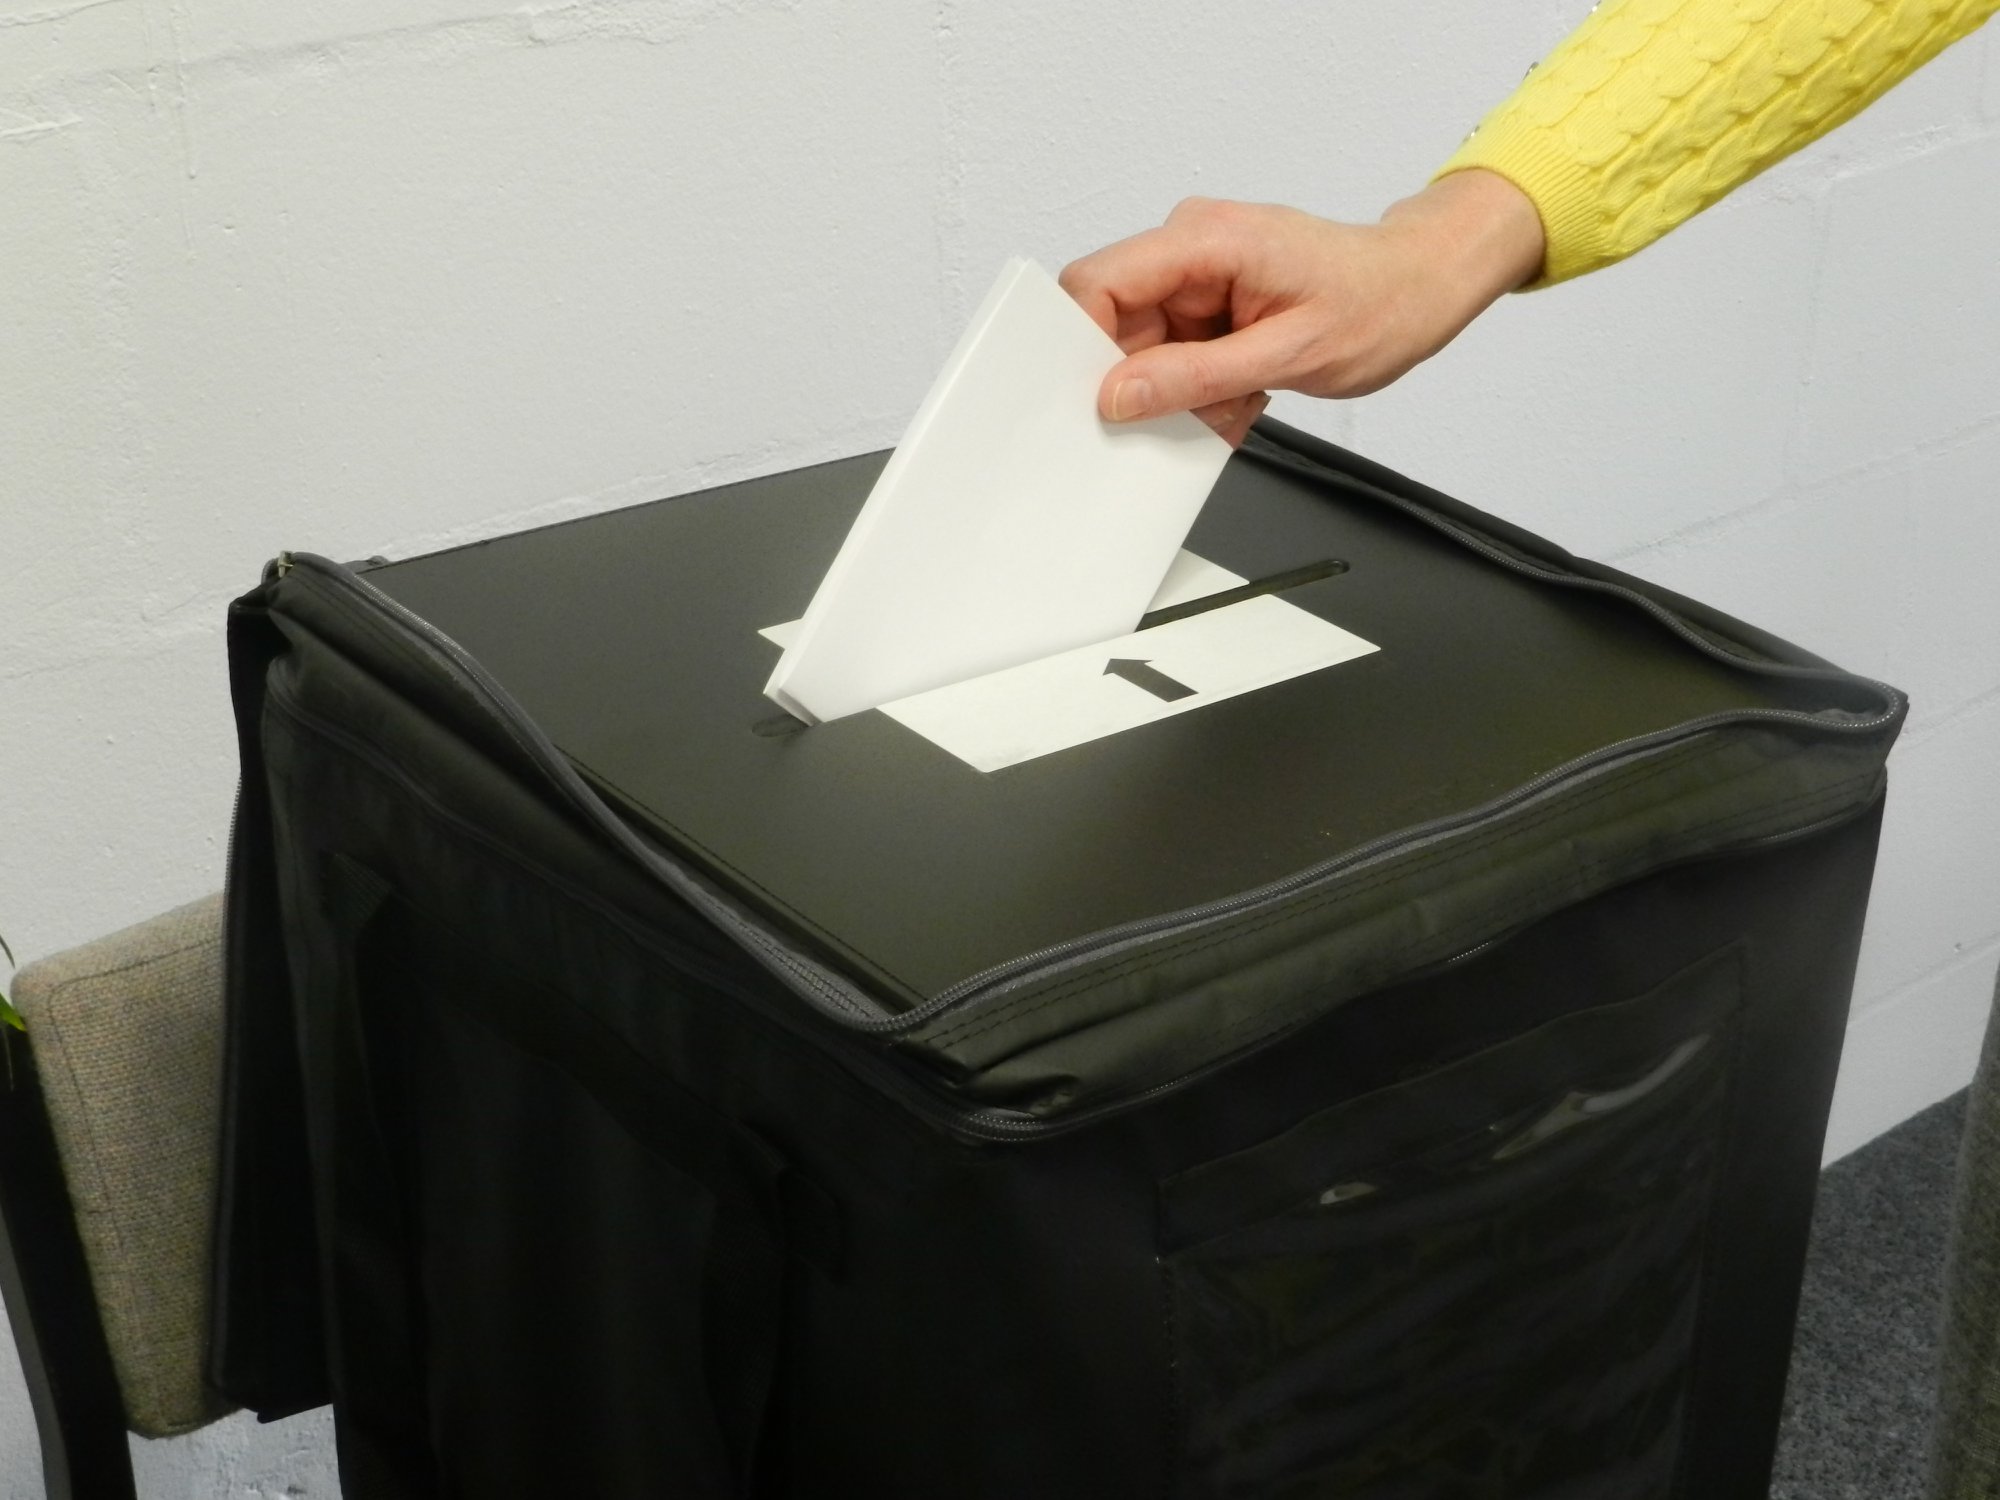 Your vote matters so keep your details up-to-date, says council